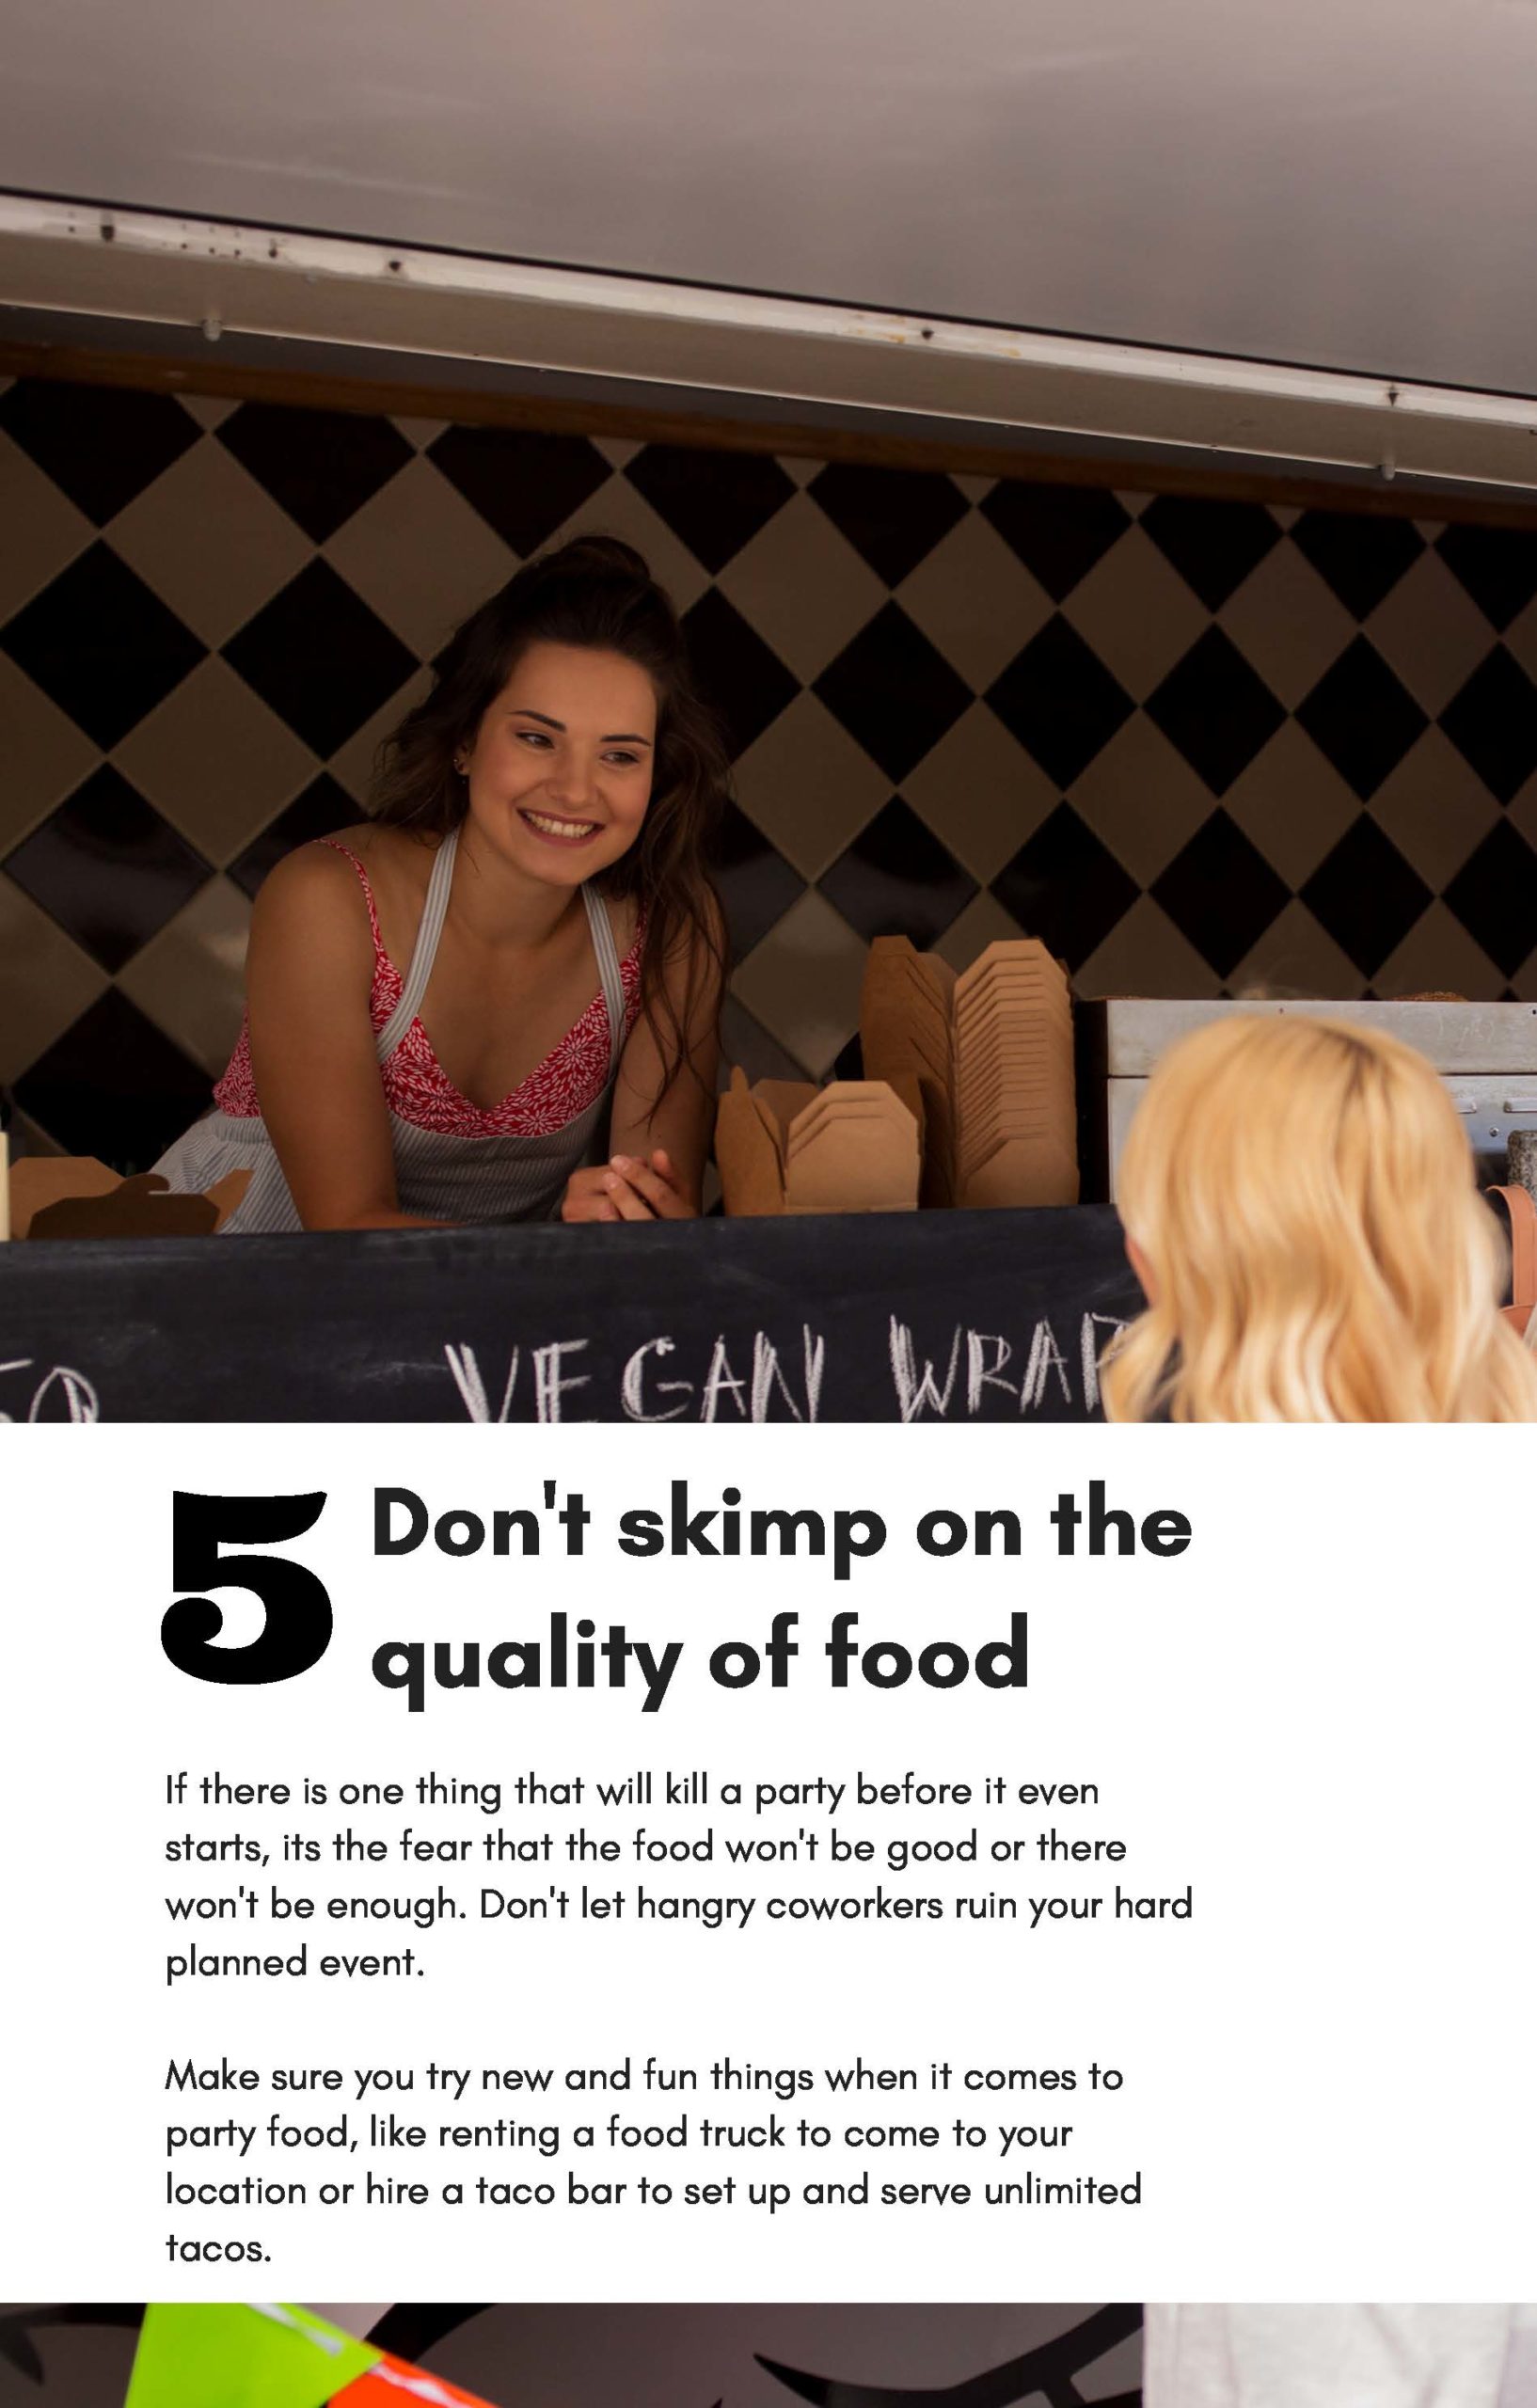 Don't skimp on the quality of food